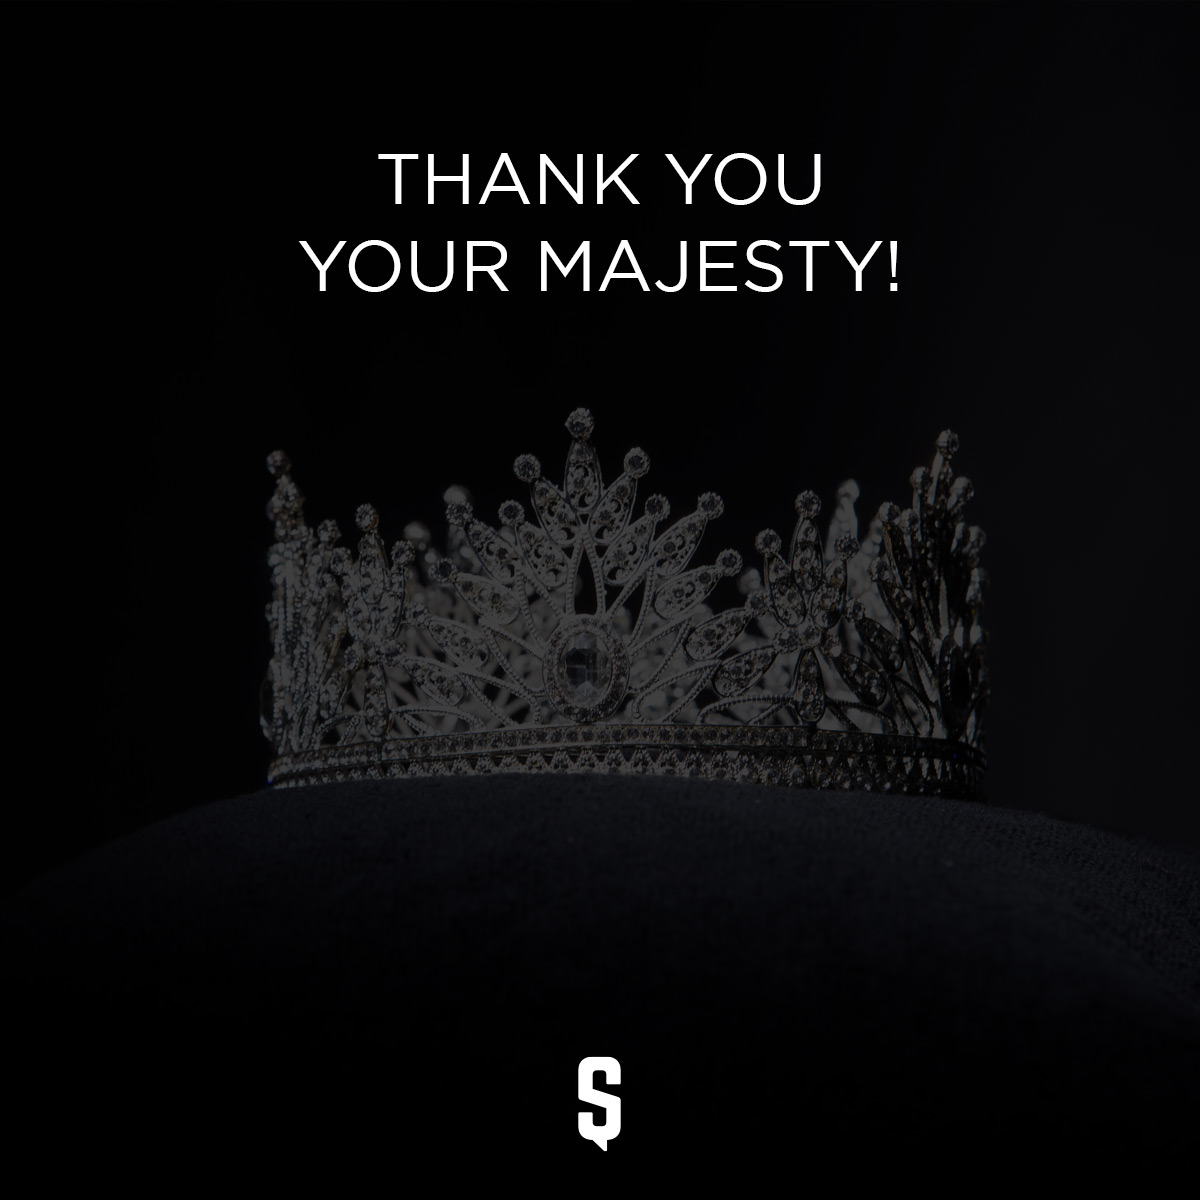 Thank you your majesty!